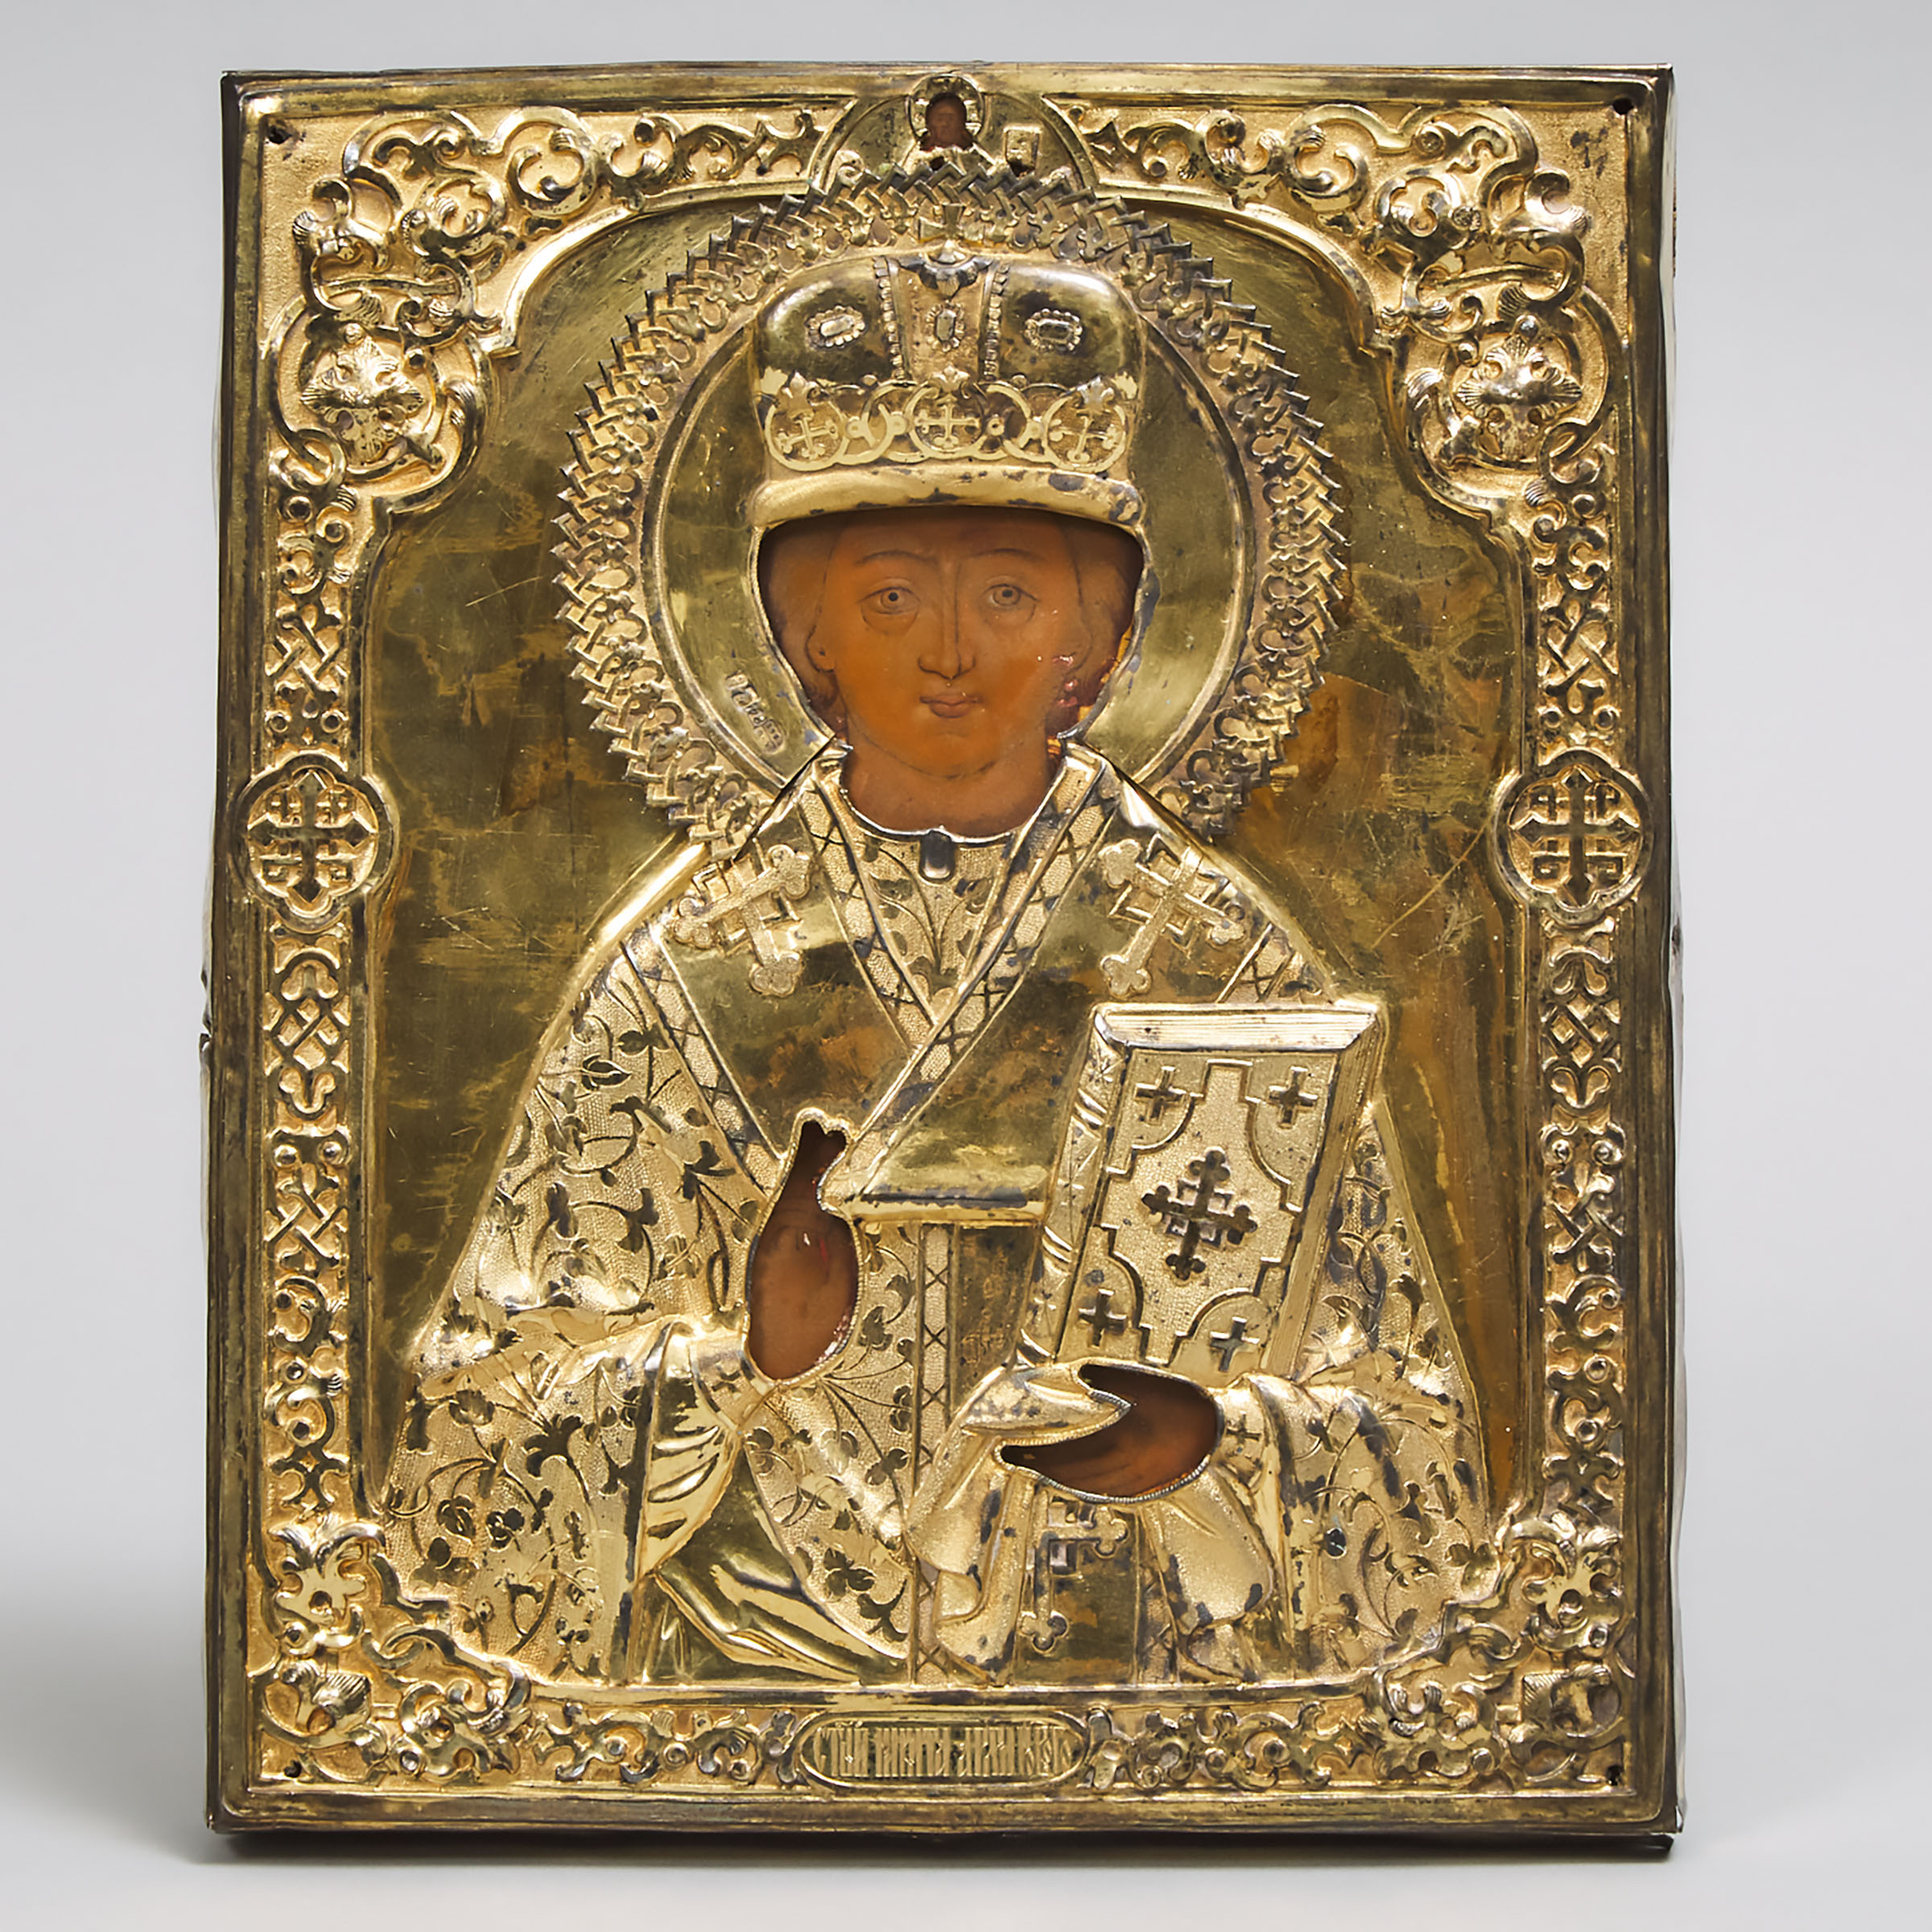 Russian Silver-Gilt and Painted Icon of Saint Nikita, Bishop of Novgorod, Moscow, 1863